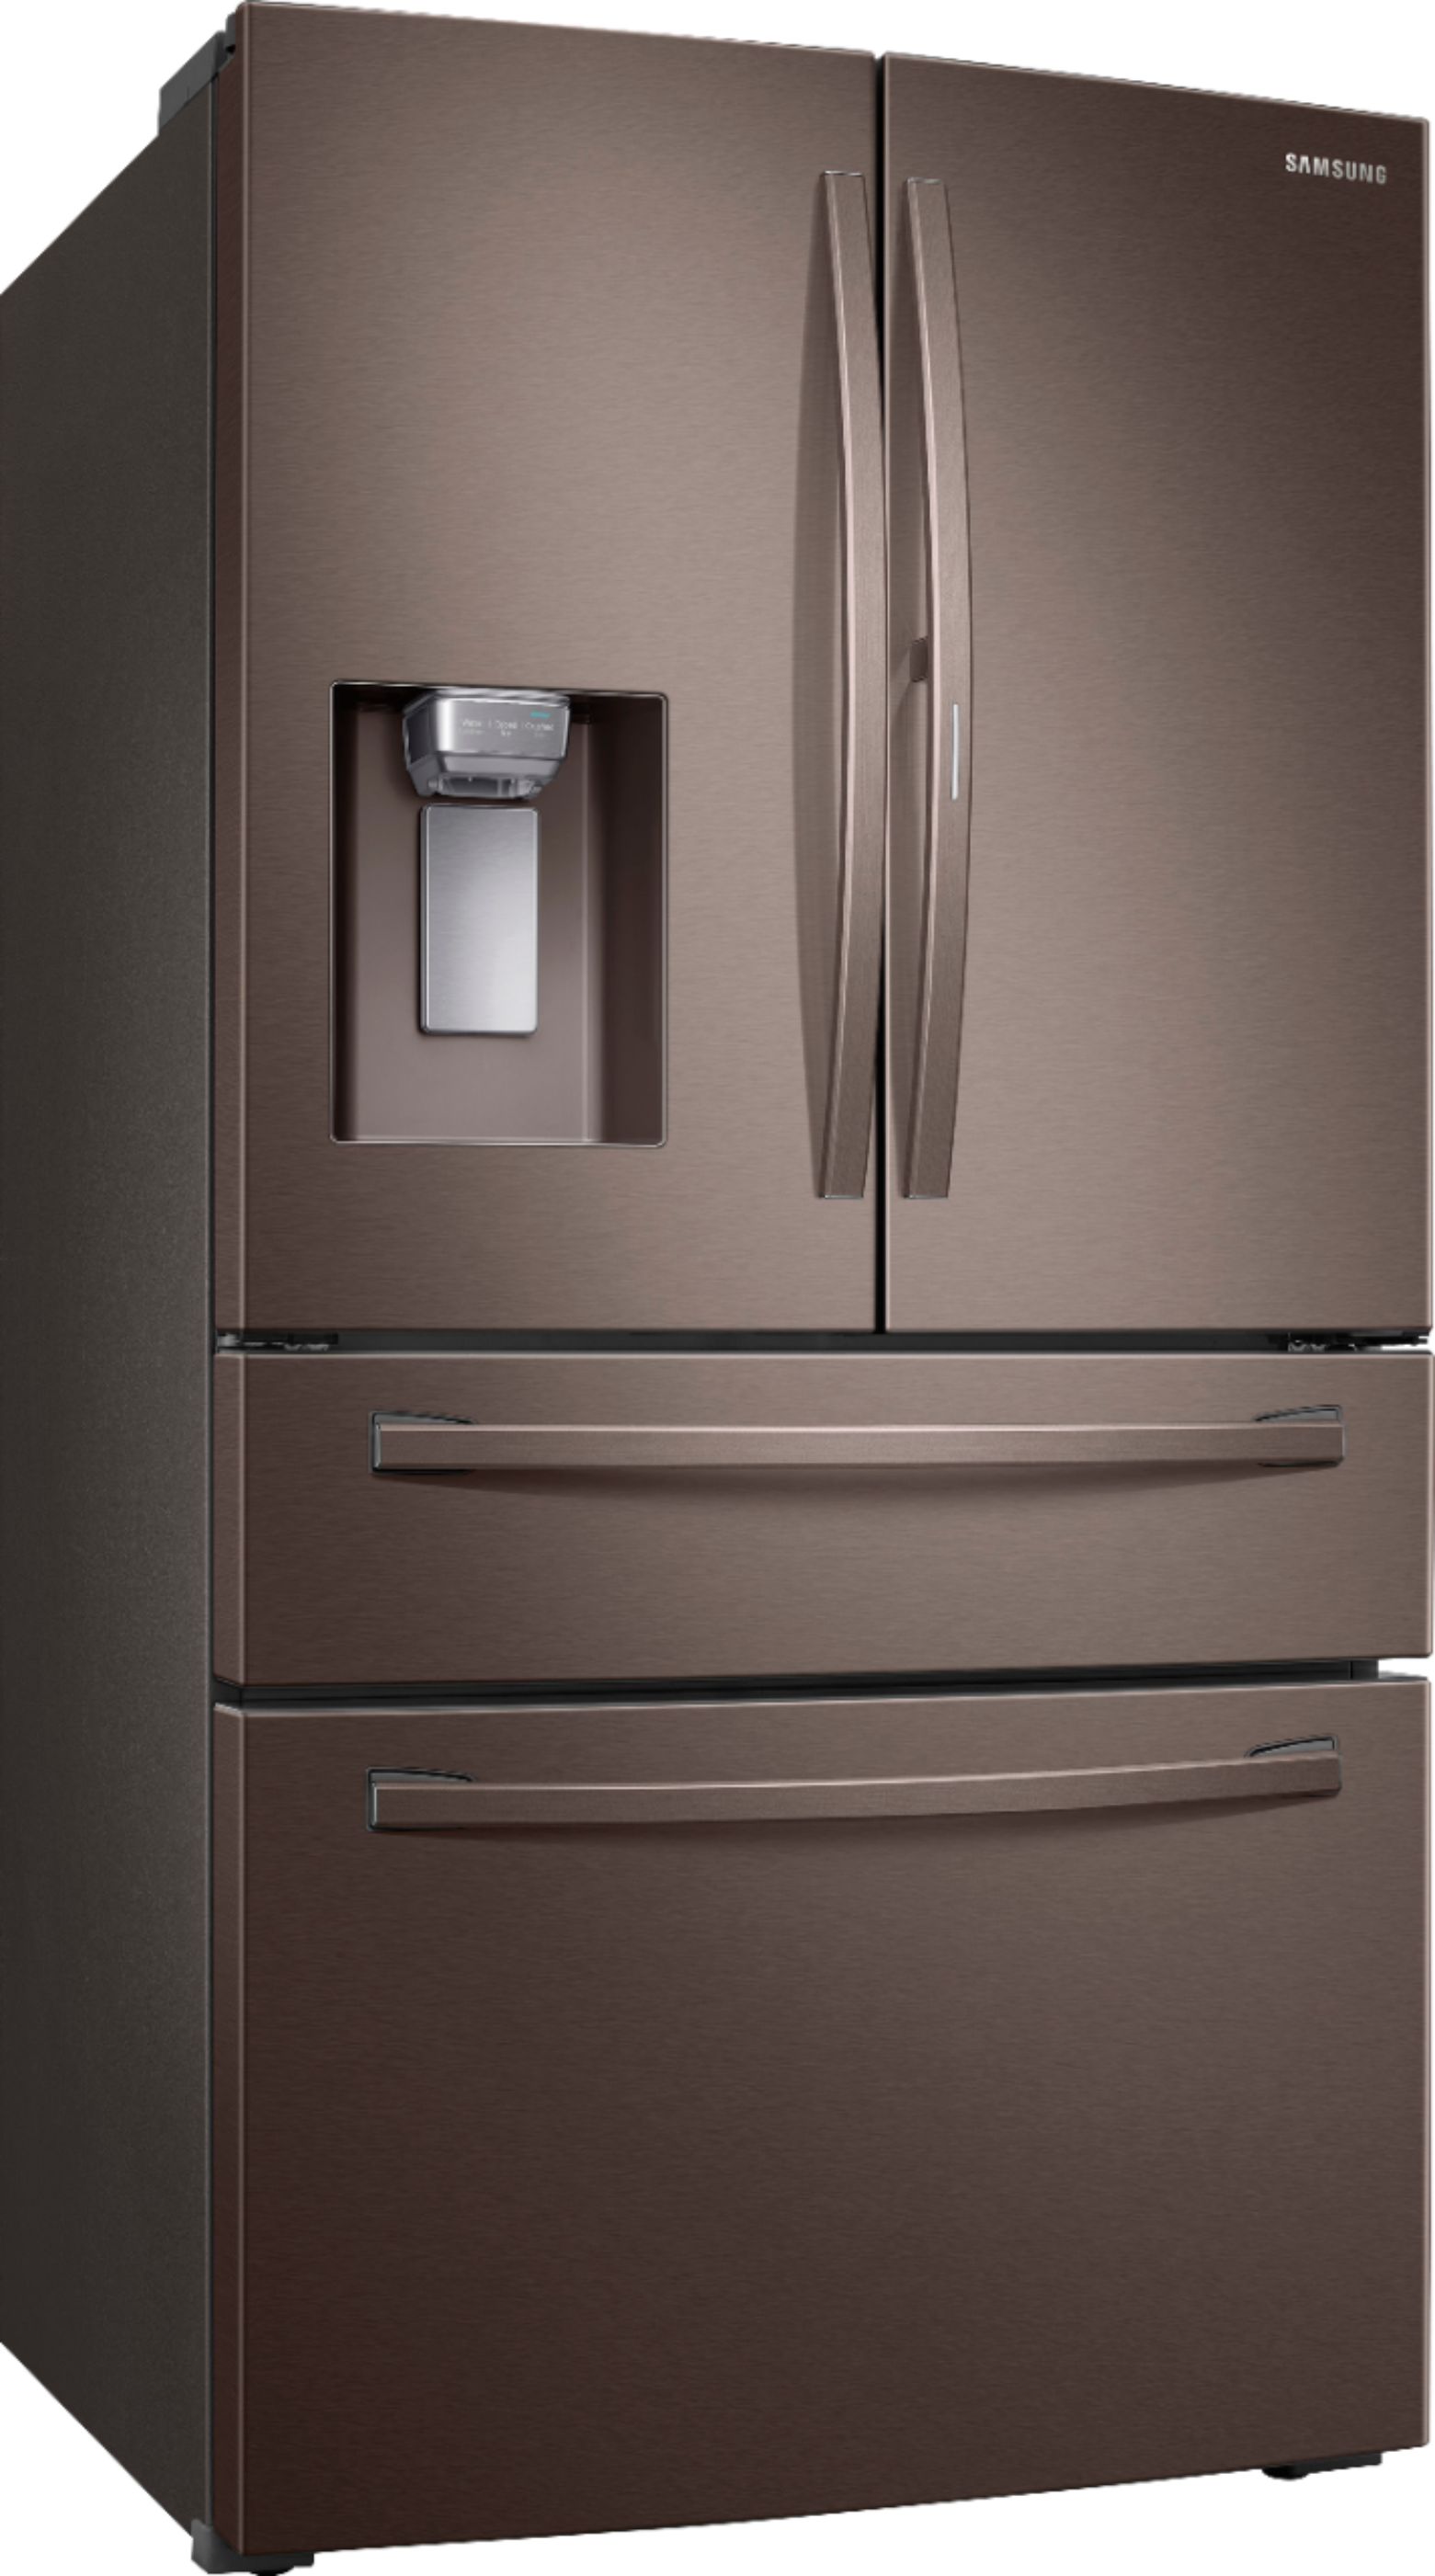 Angle View: Samsung - 22.4 Cu. Ft. 4-Door French Door Counter-Depth Refrigerator with Food Showcase - Tuscan stainless steel